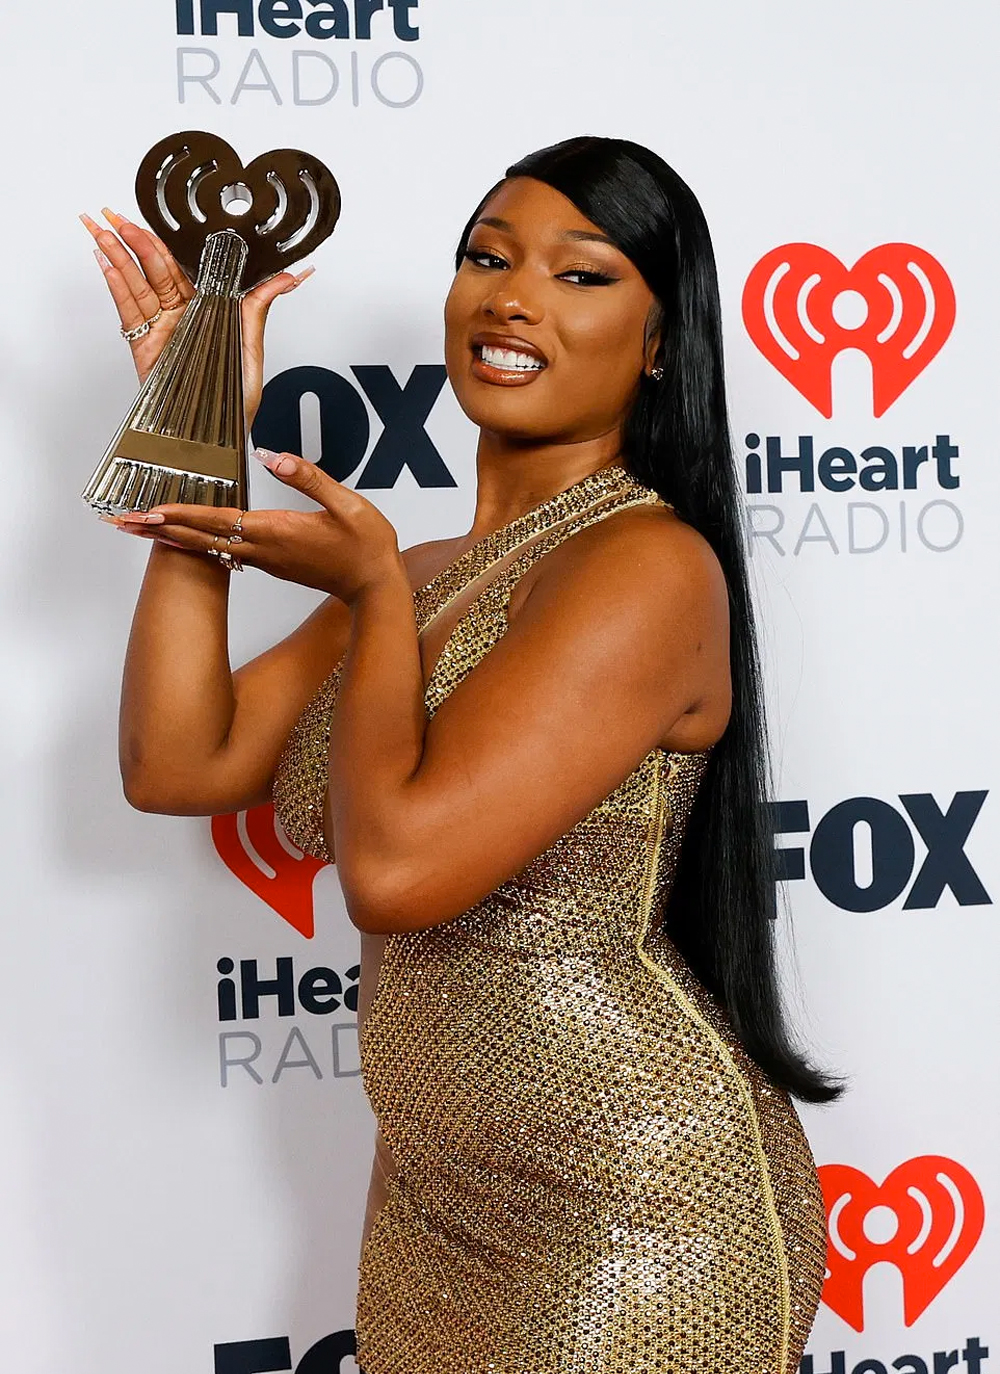 Megan Thee Stallion is golden vision in this dress a the IHeart Music